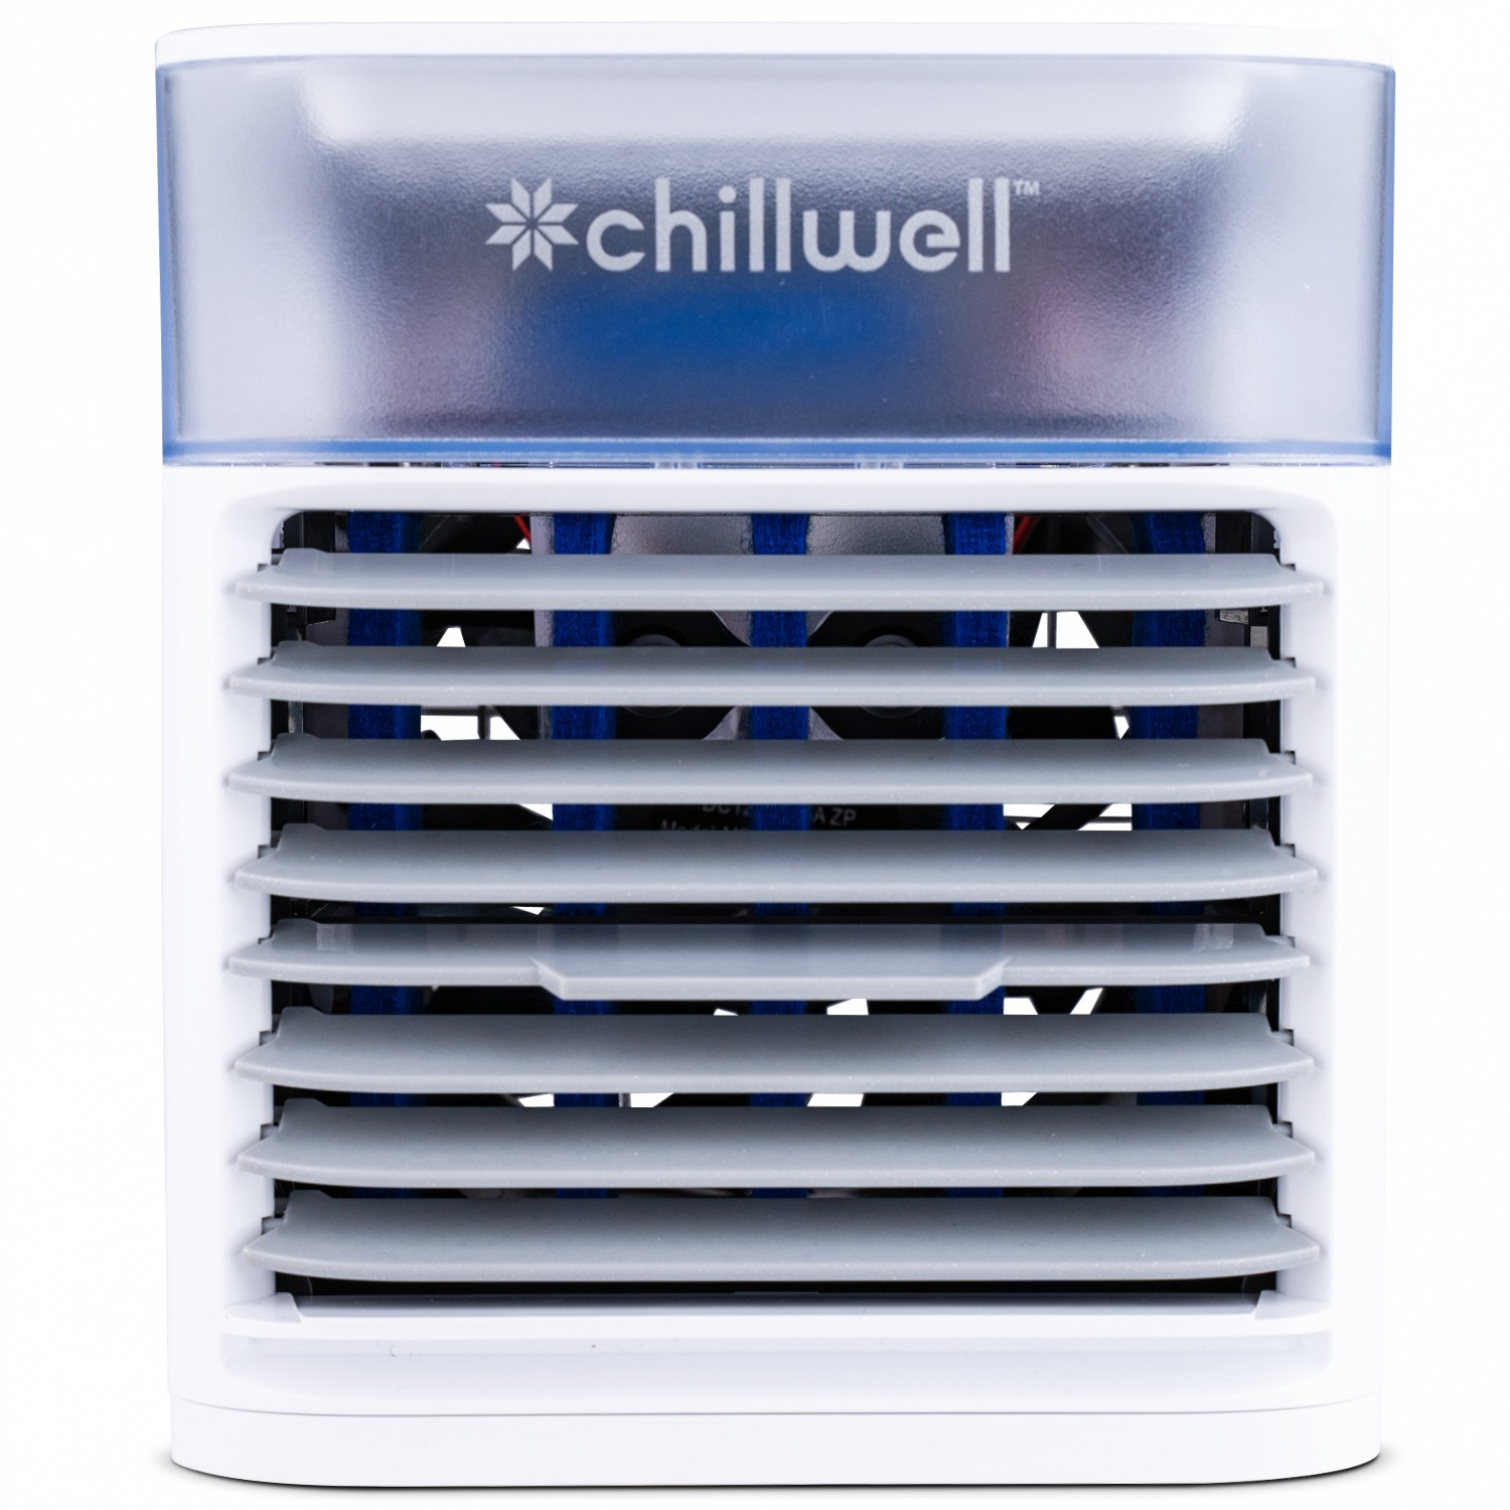 Chillwell AC Portable